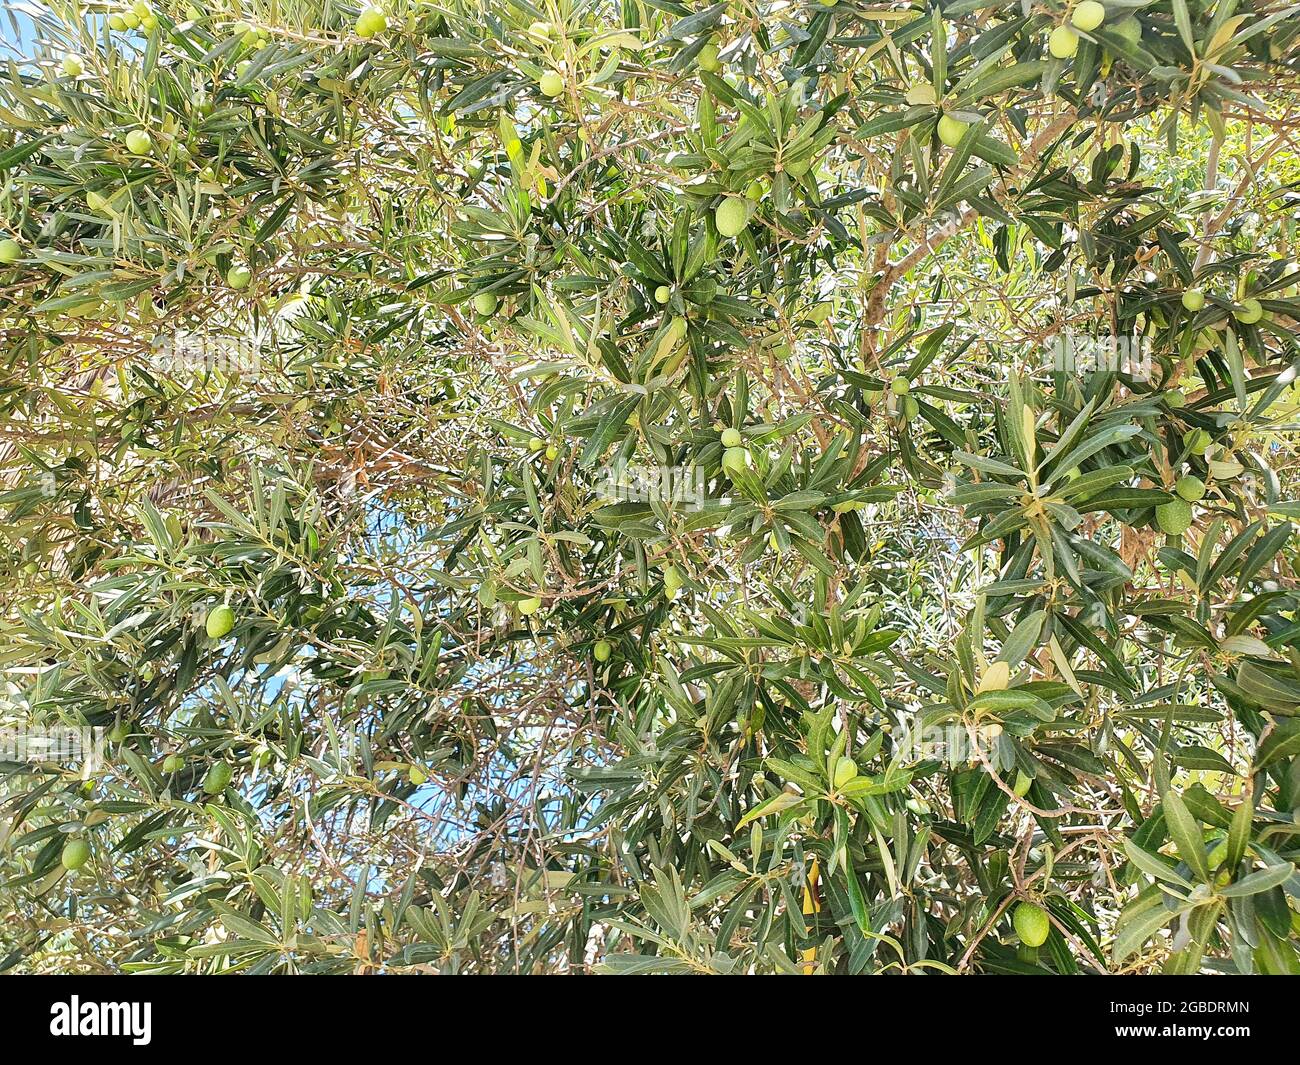 Green fruits of the olive tree. The fruits are large and will ripen soon in the warm summer sun. Stock Photo